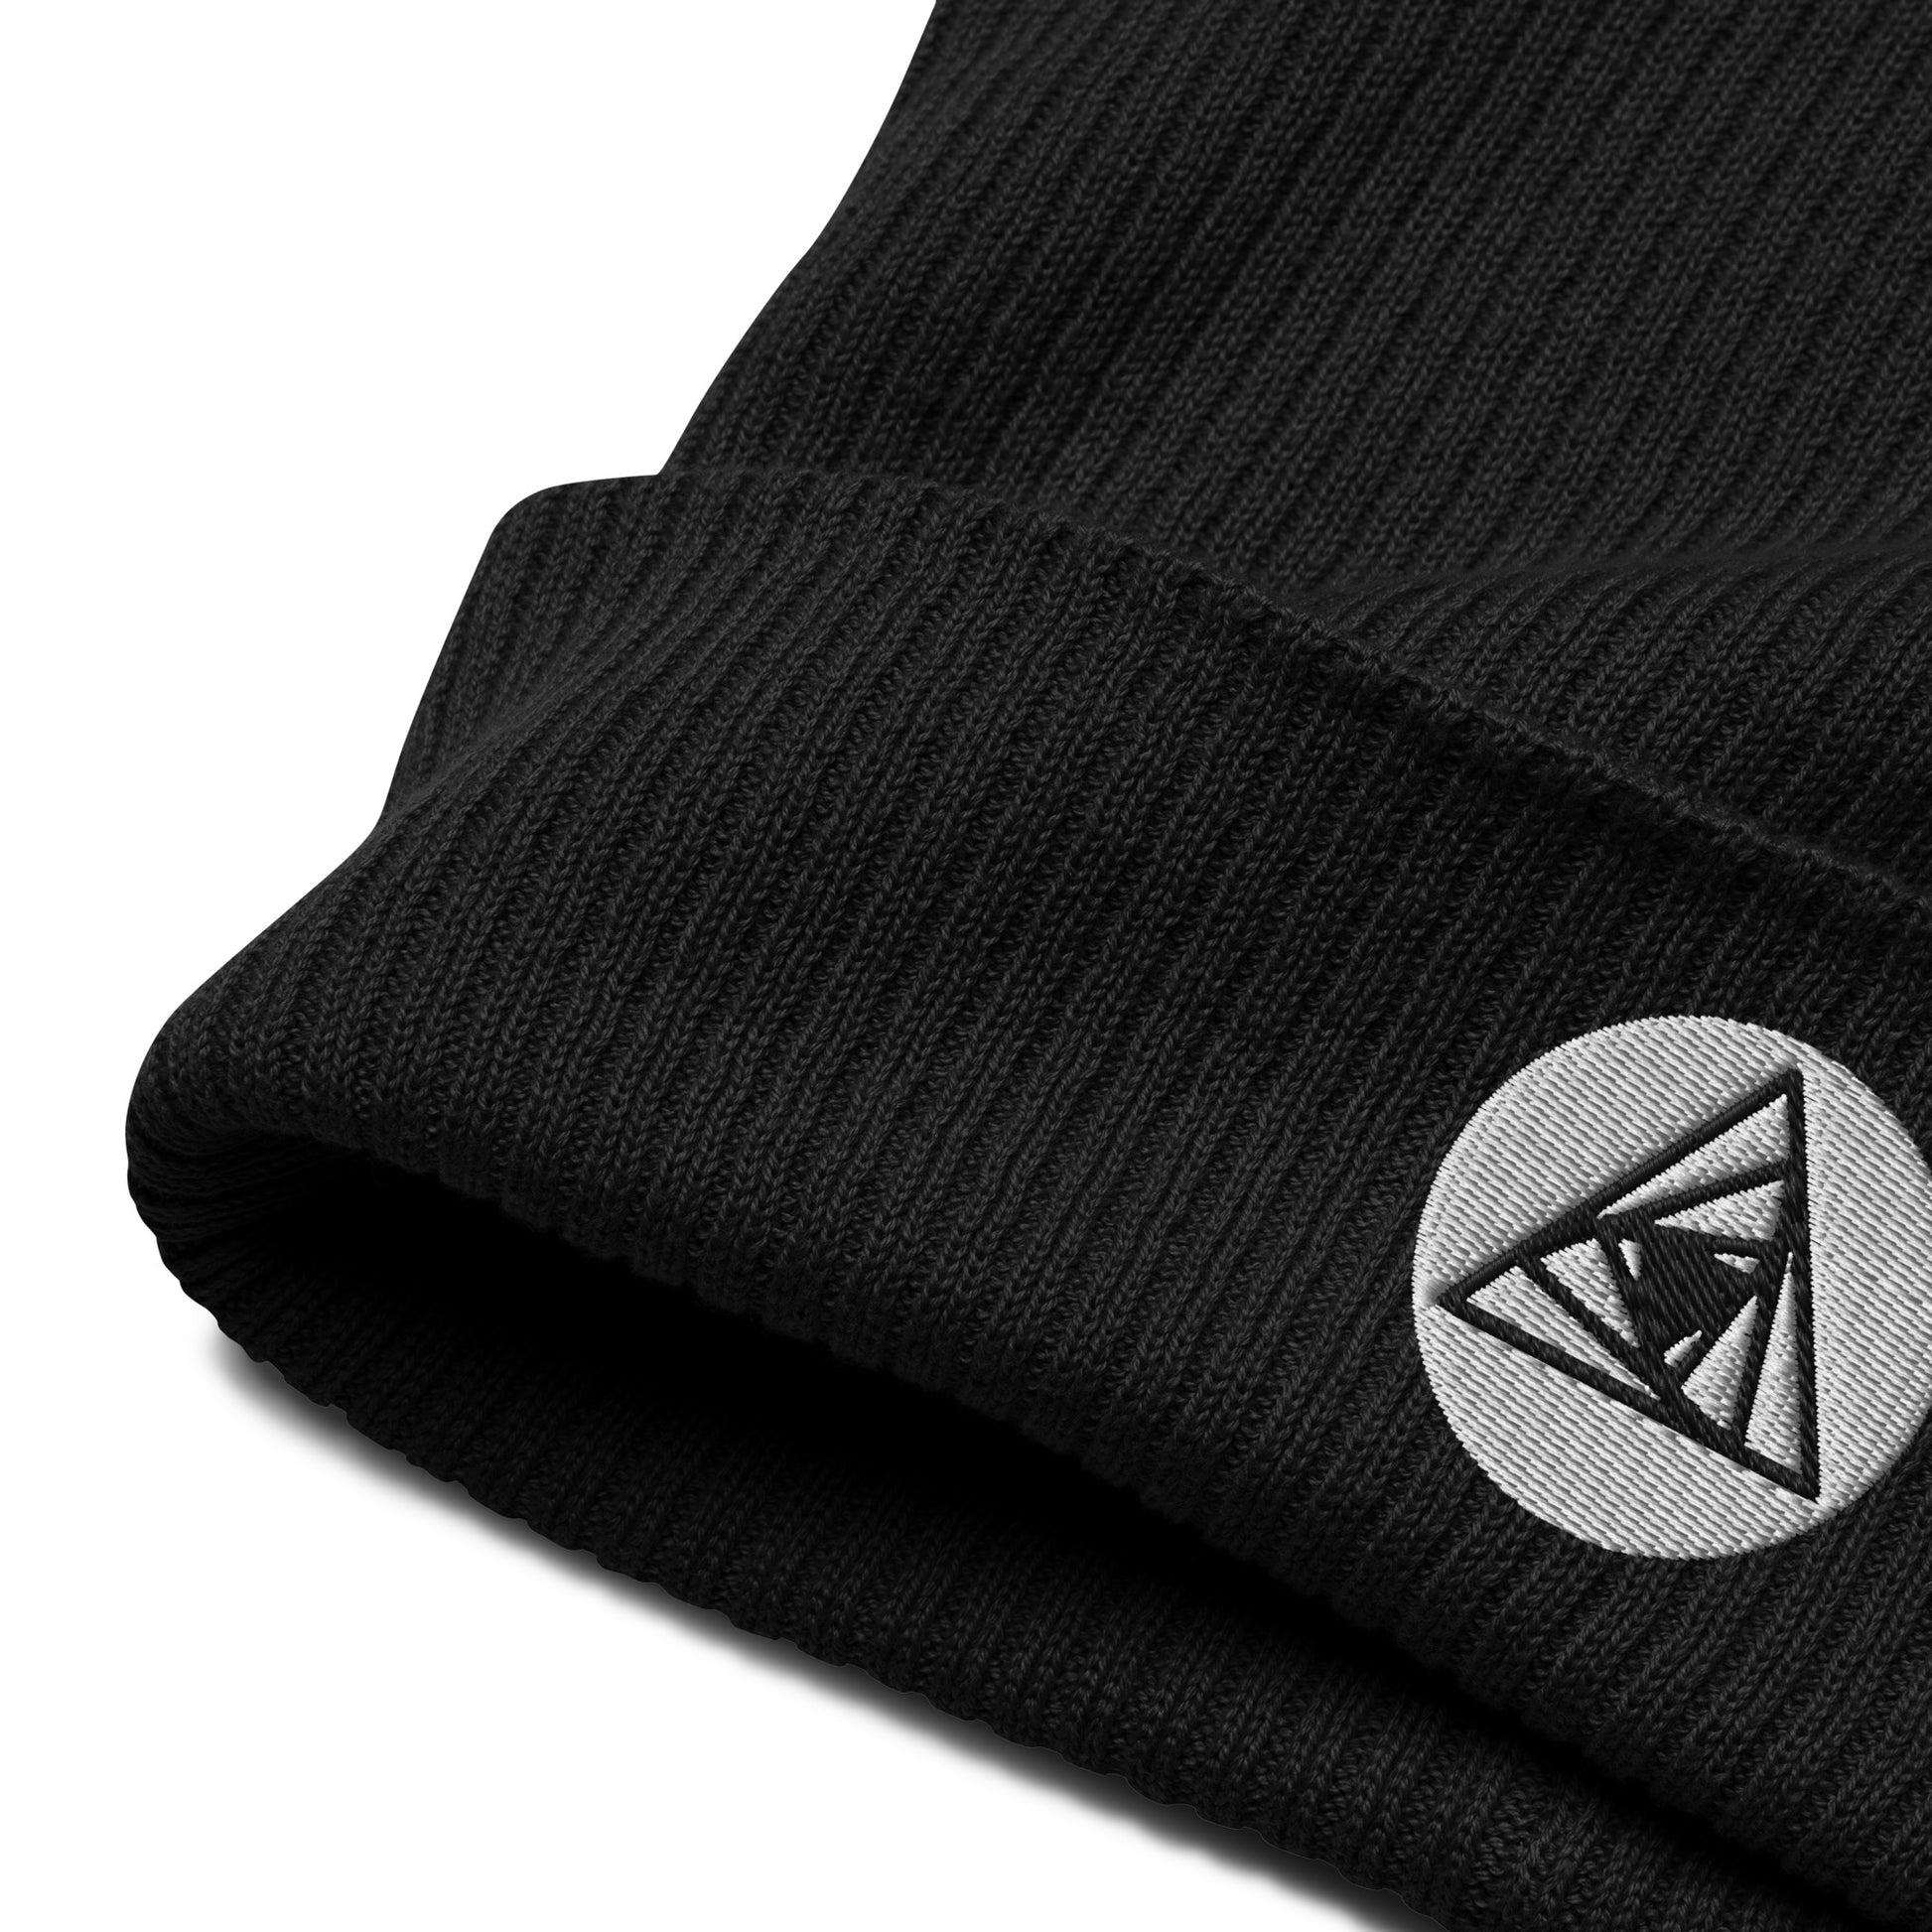 Behold, our Spiraling Equilateral Triangles Beanie in midnight black —a garment of cosmic significance. Crafted from organic cotton and adorned with a mesmerizing Spiraling Equilateral Triangles embroidery, it's not your run-of-the-mill hat. 